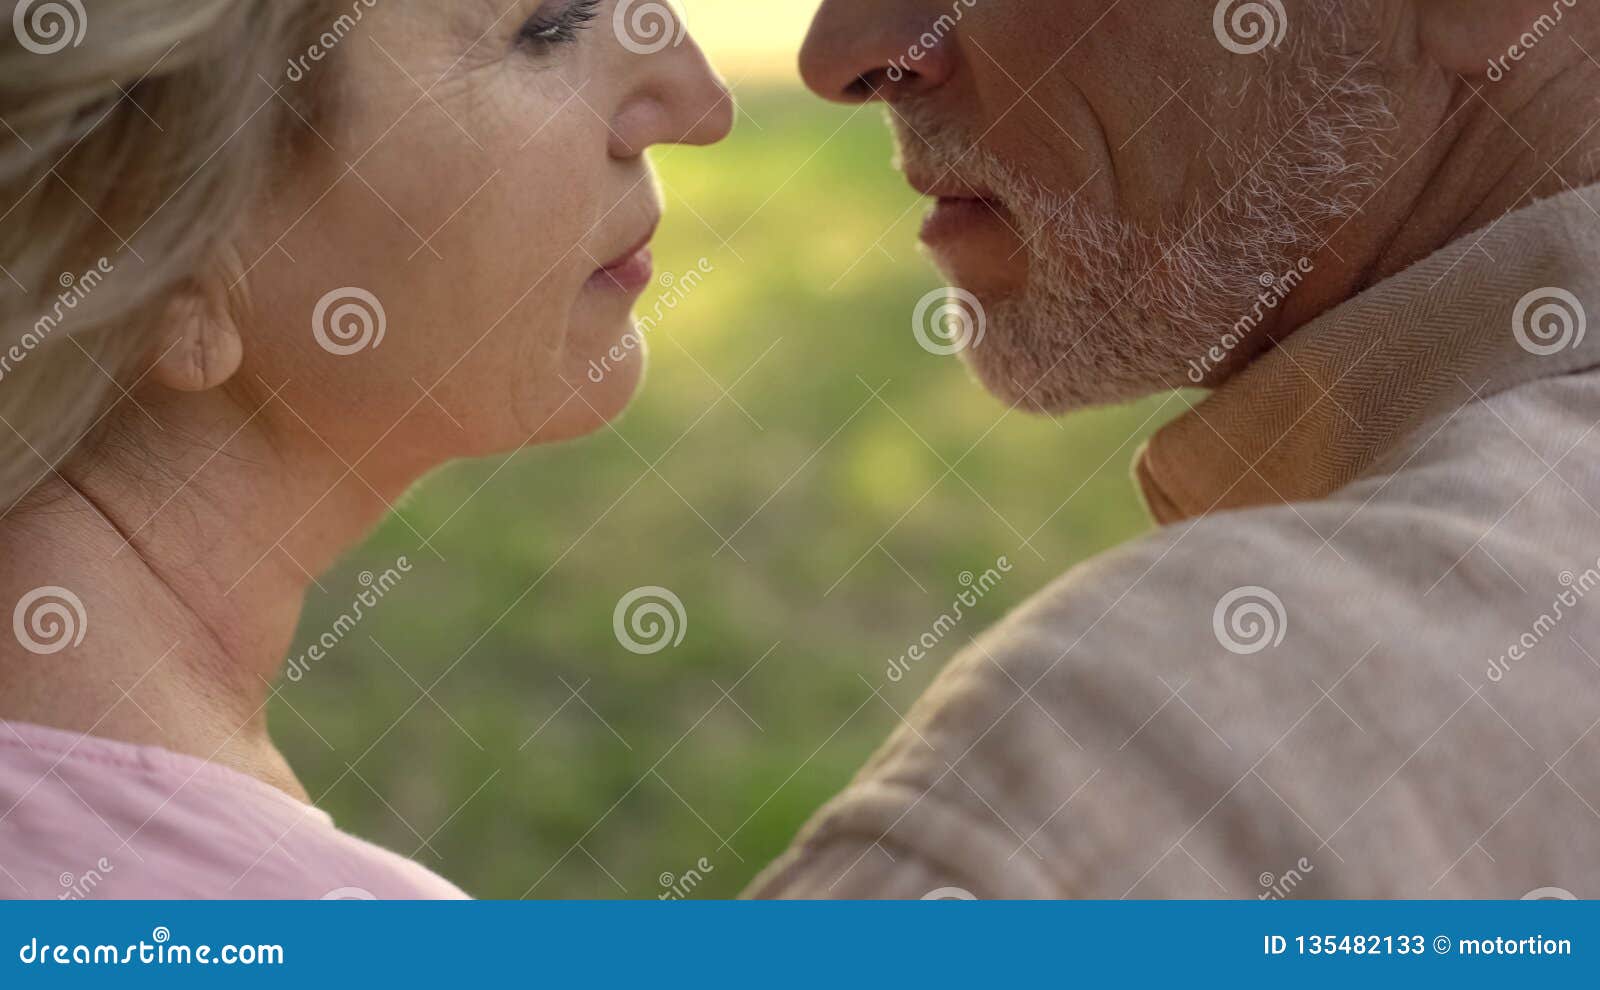 retired husband and wife enjoying time together, couple closeness, passion